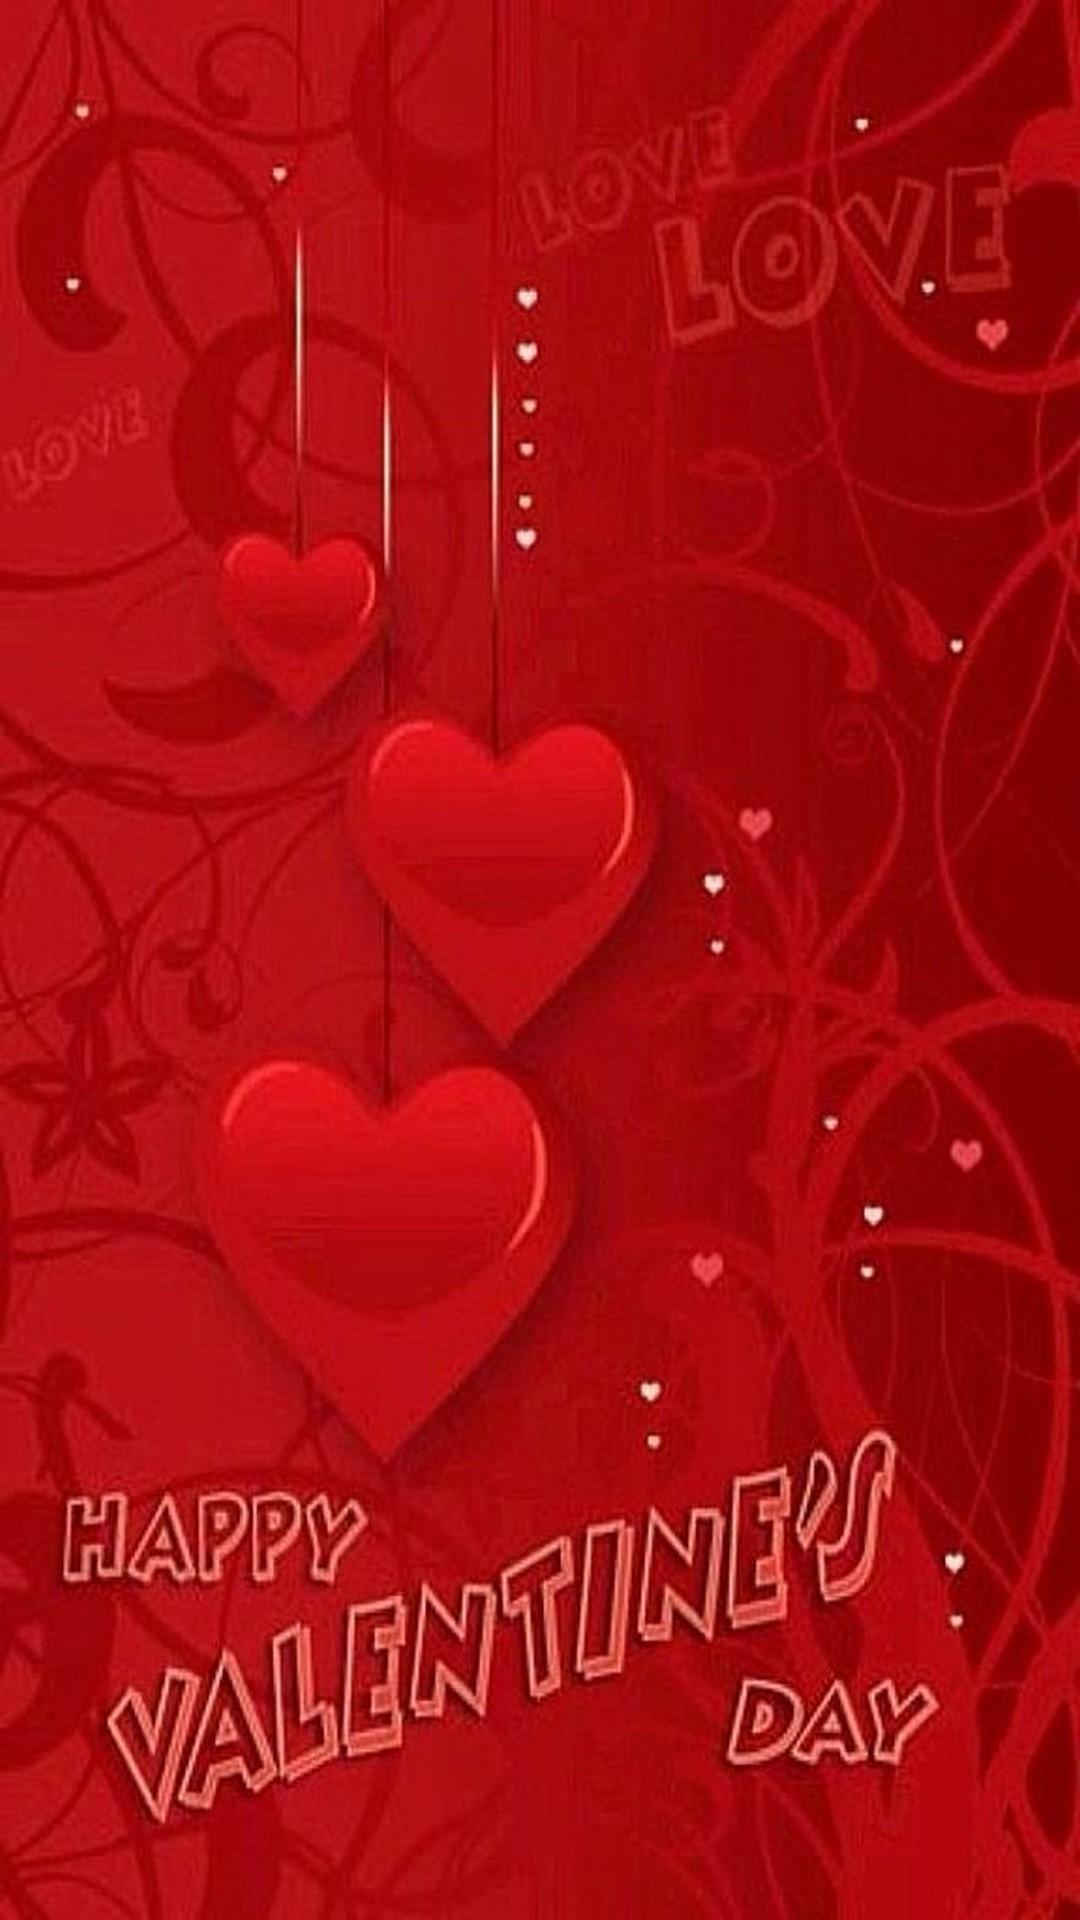 Happy Valentines Day Image For Android Android Wallpaper